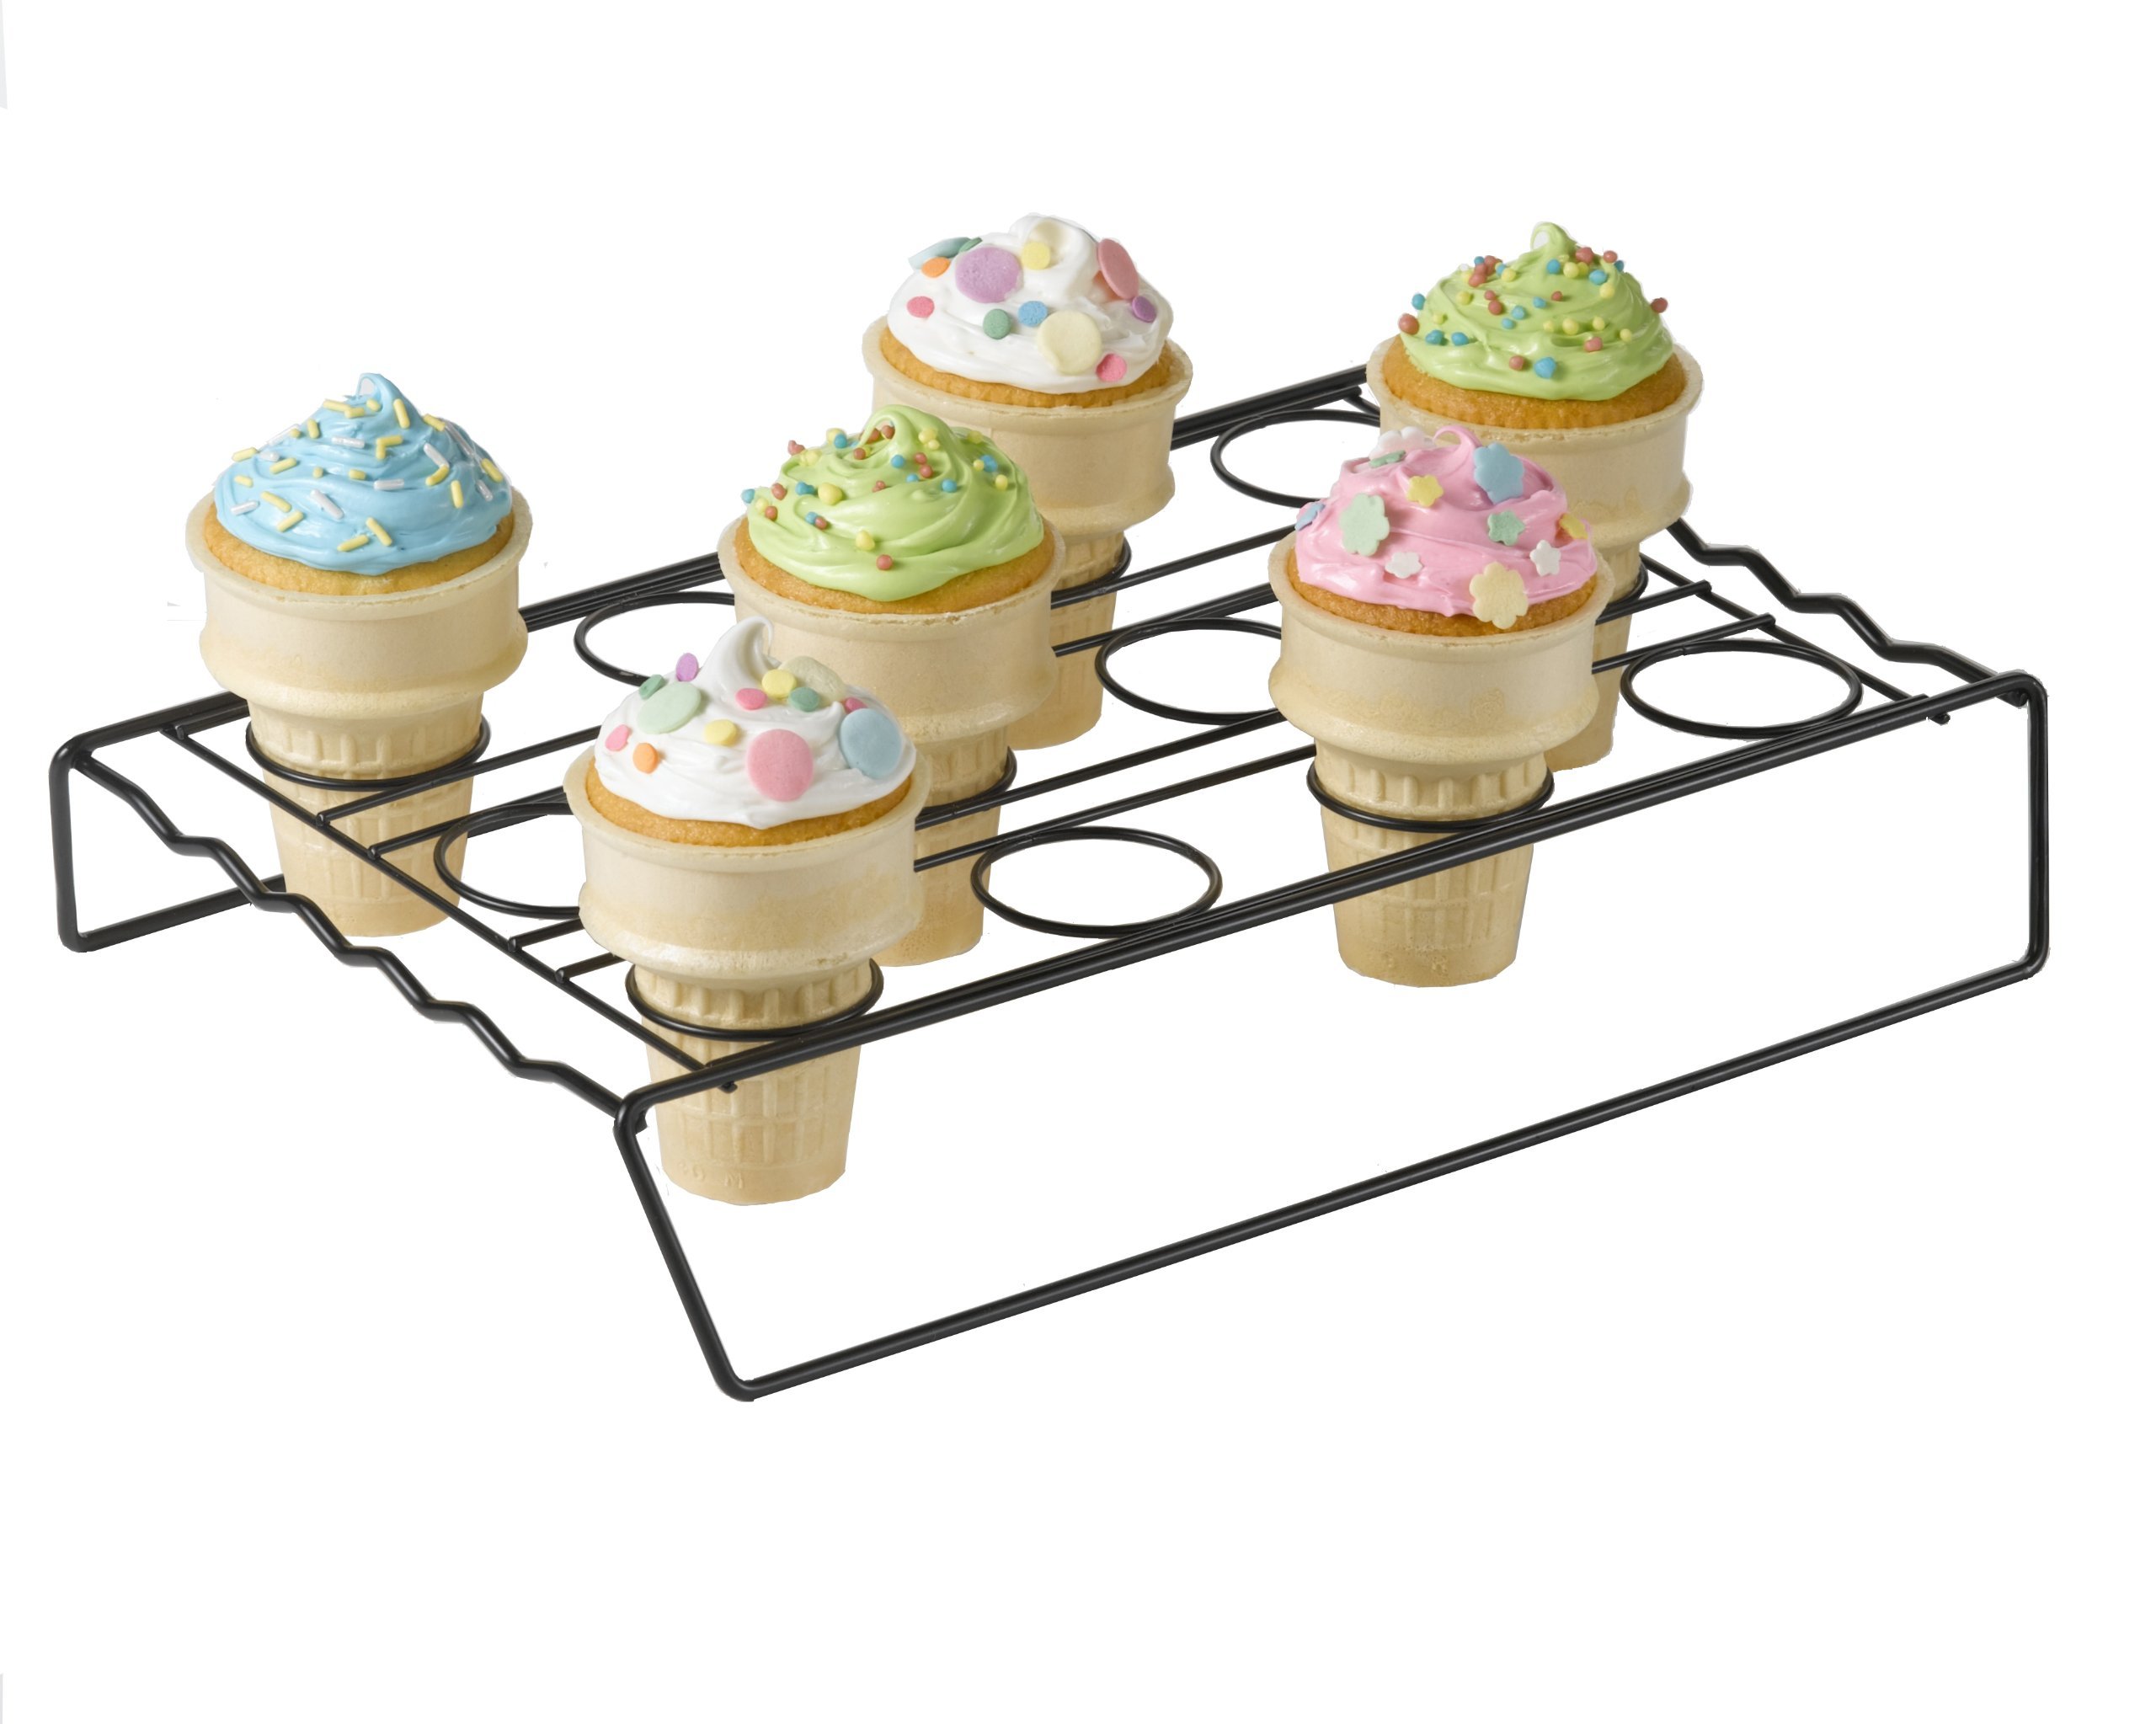 Nifty Solutions Ice Cream Cone Cupcake Baking Rack – Holds up to 12 Medium & Large Cupcake Cones, Non-Stick, Black - image 1 of 9